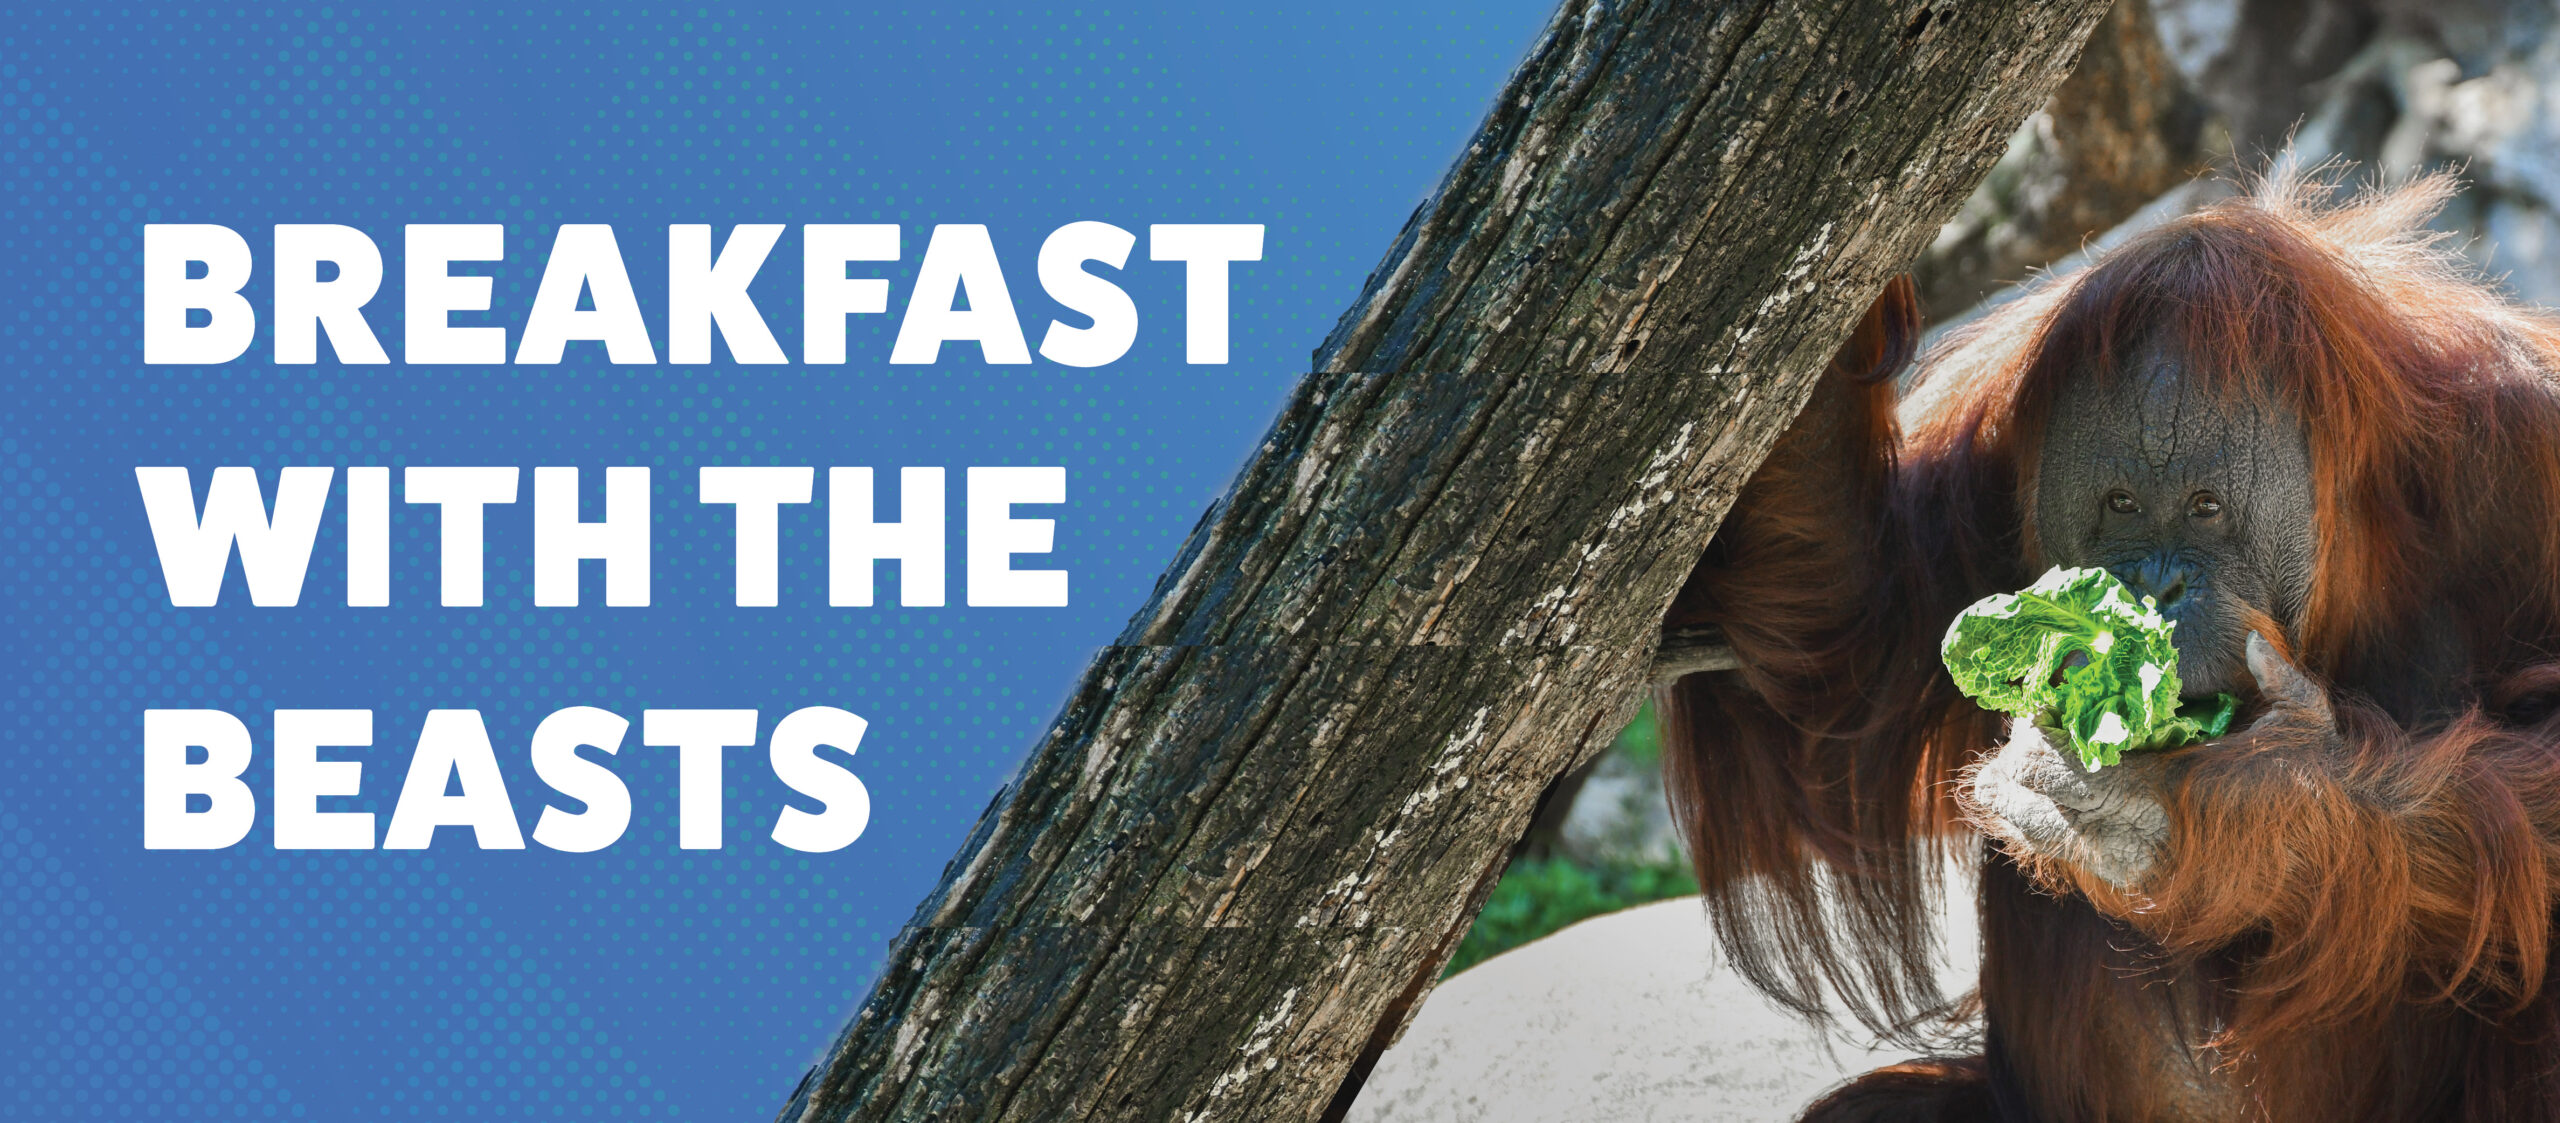 Breakfast with the Beasts Header